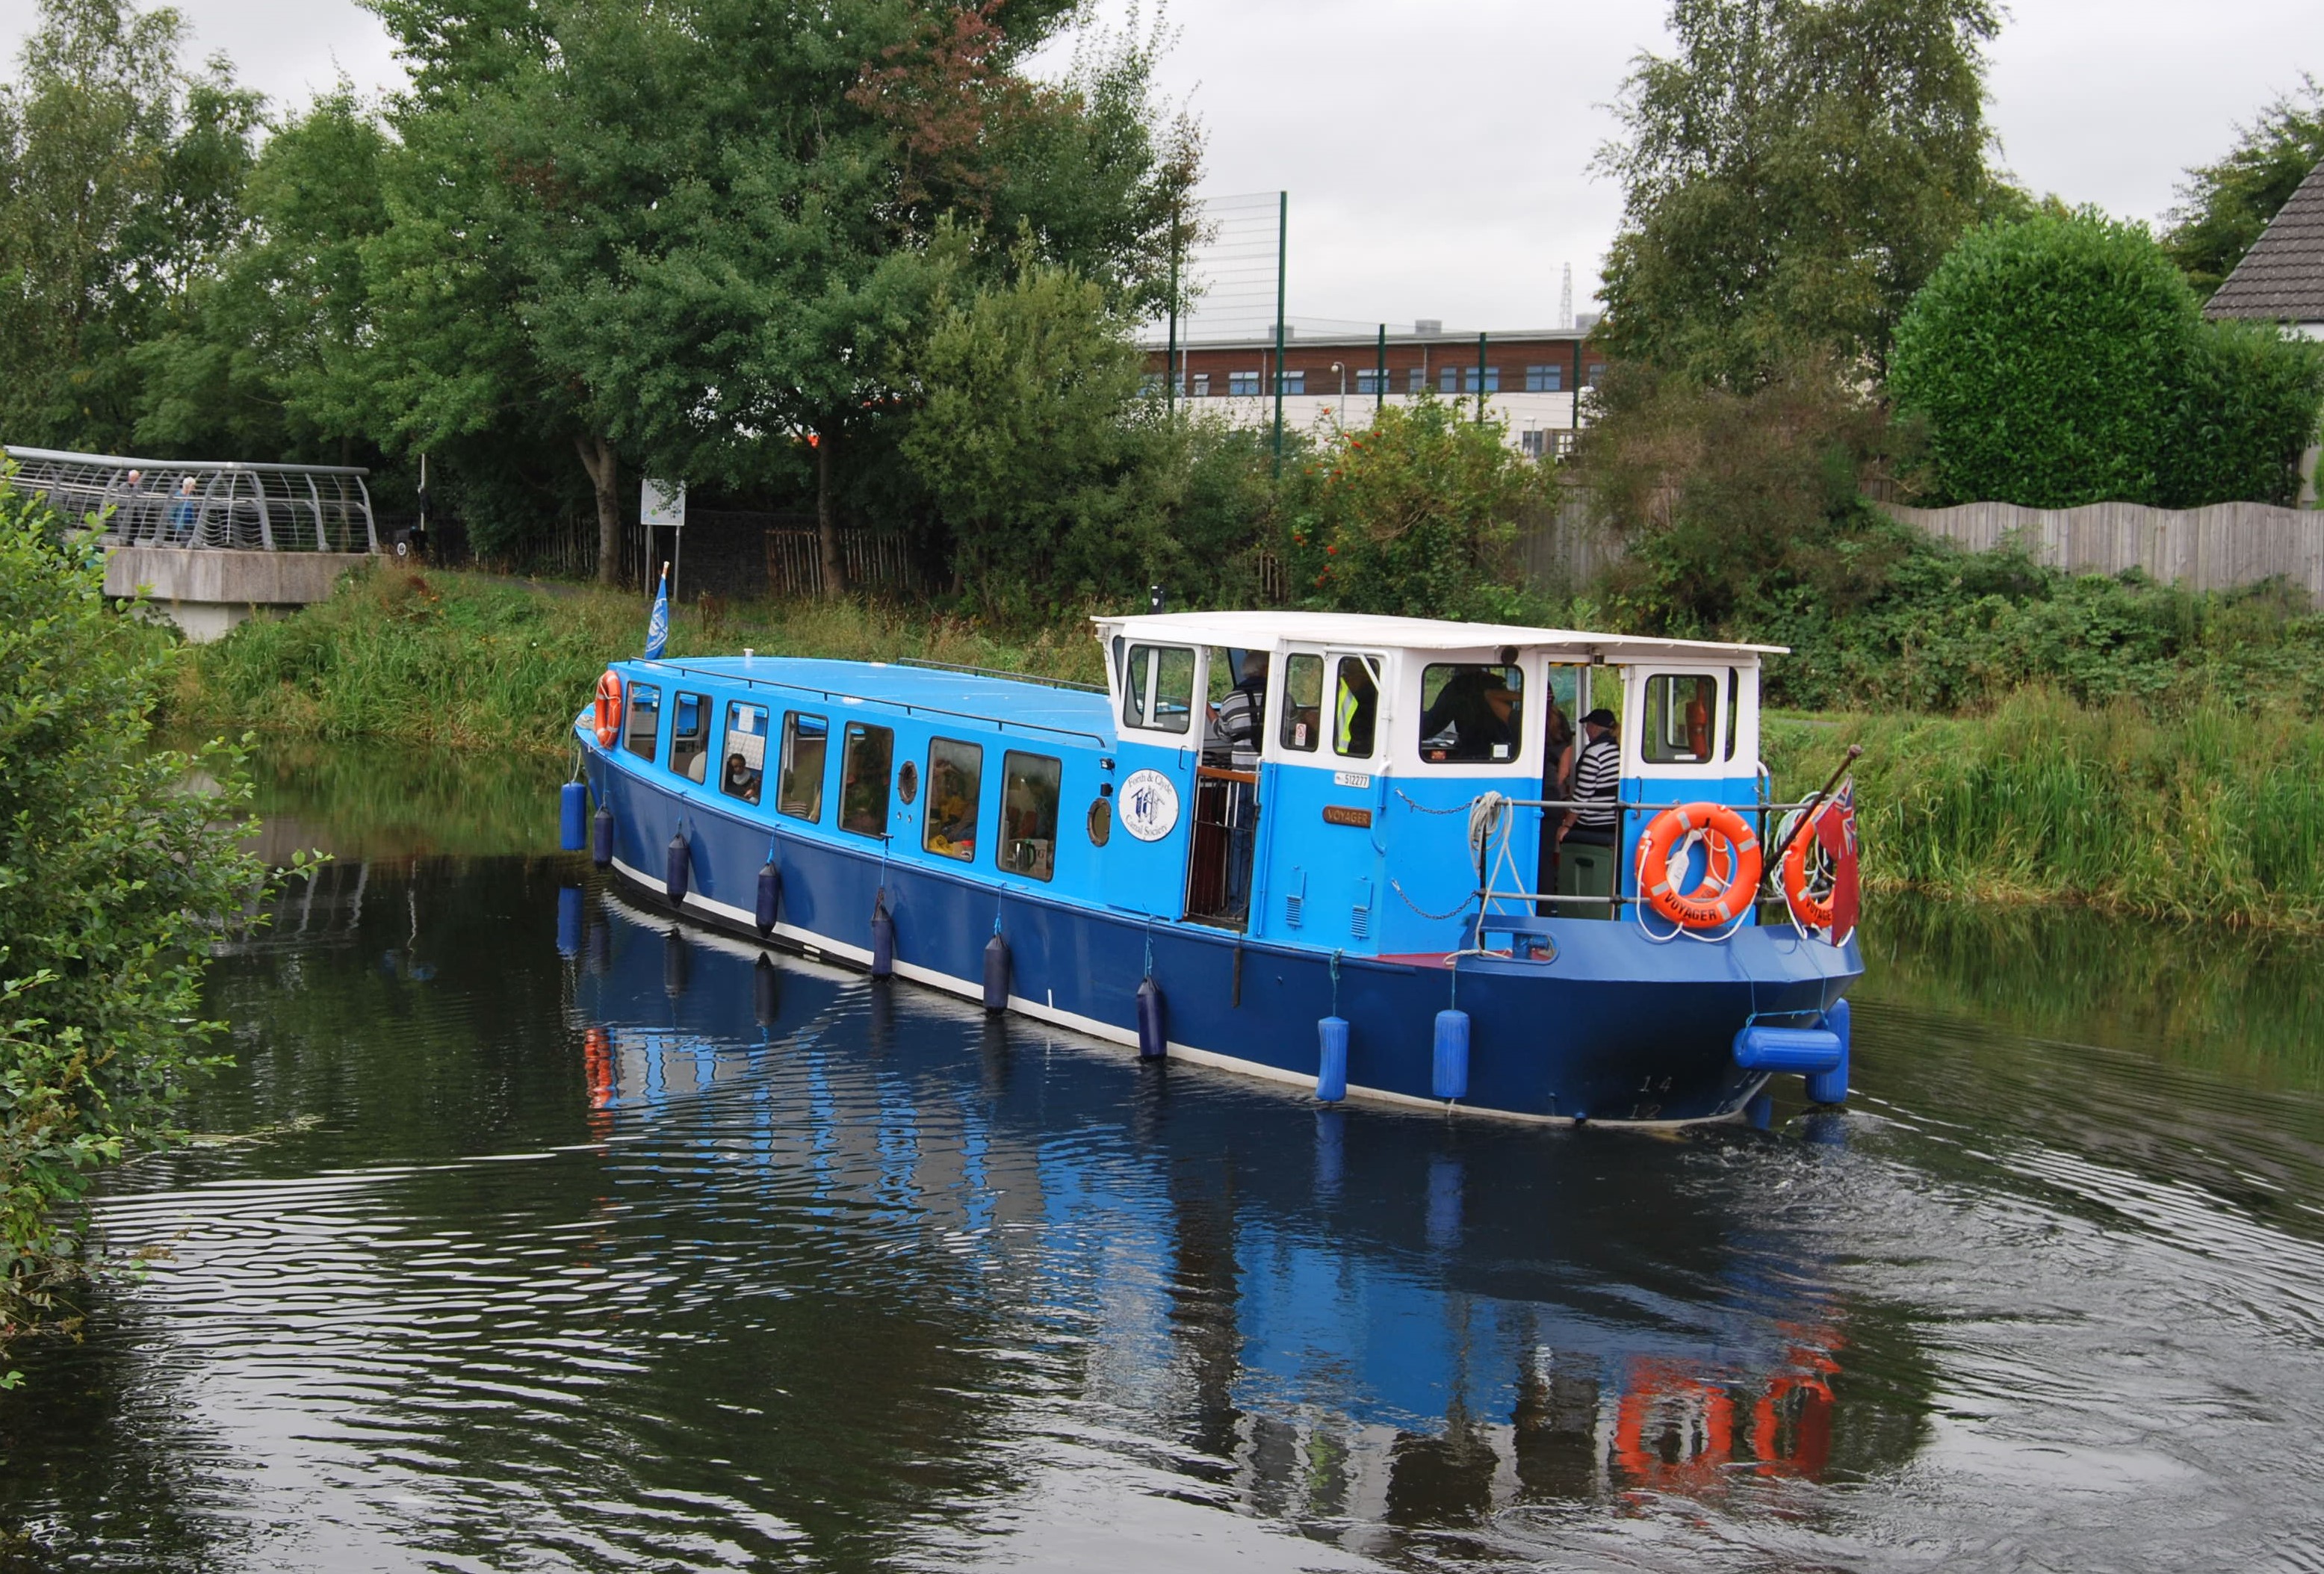 And finally... Are you ready to go 'Roman' on the Forth and Clyde Canal?